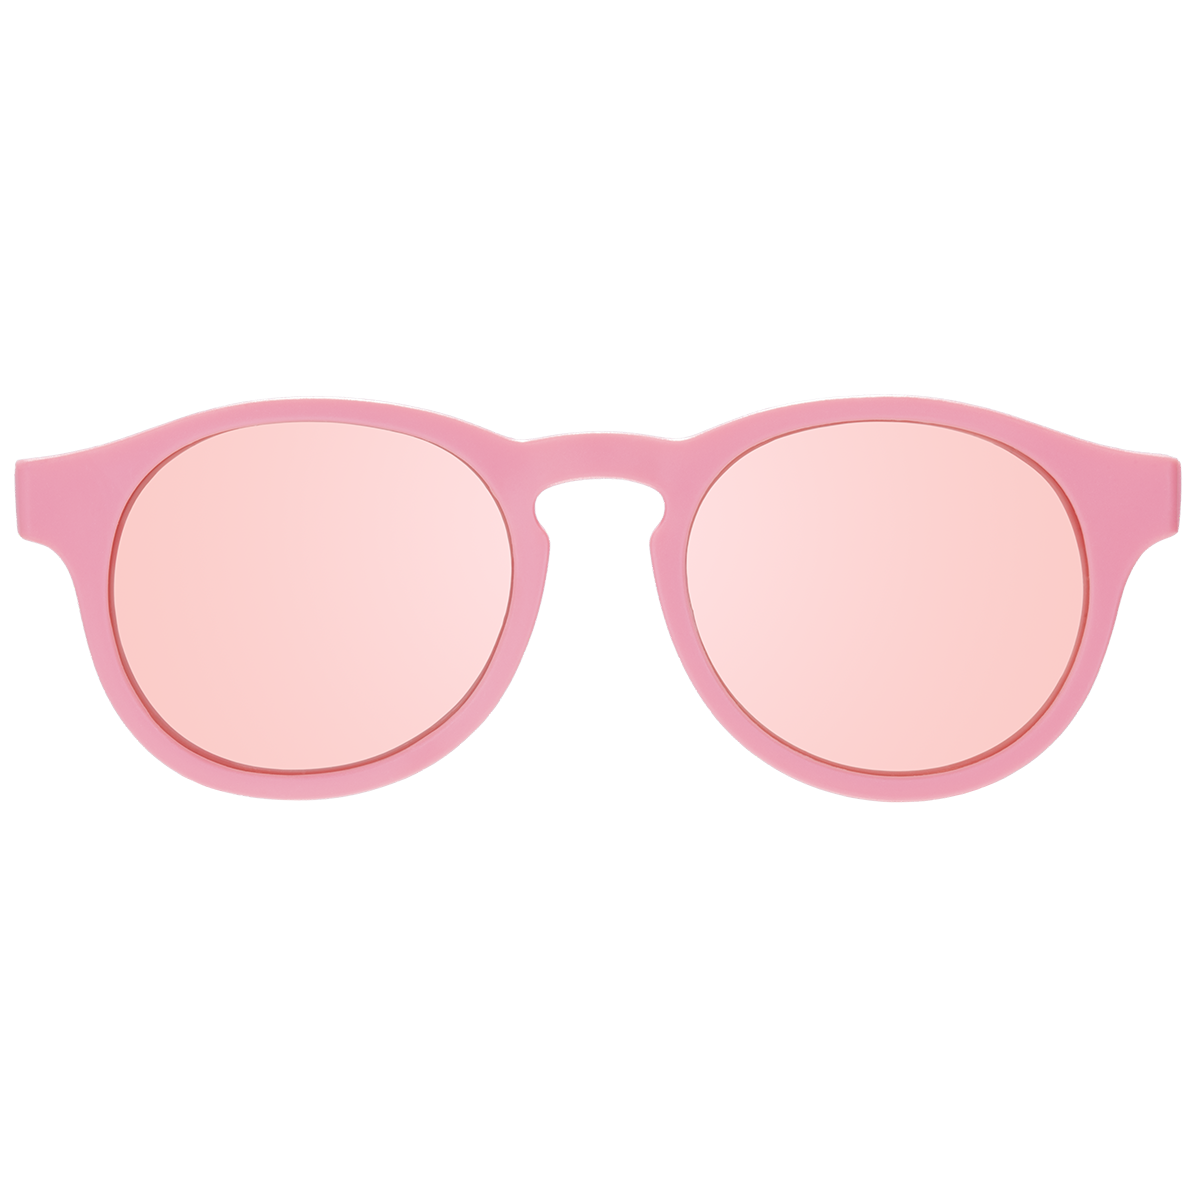 The Starlet- Polarized with Mirrored Lens Babiators Sunglasses